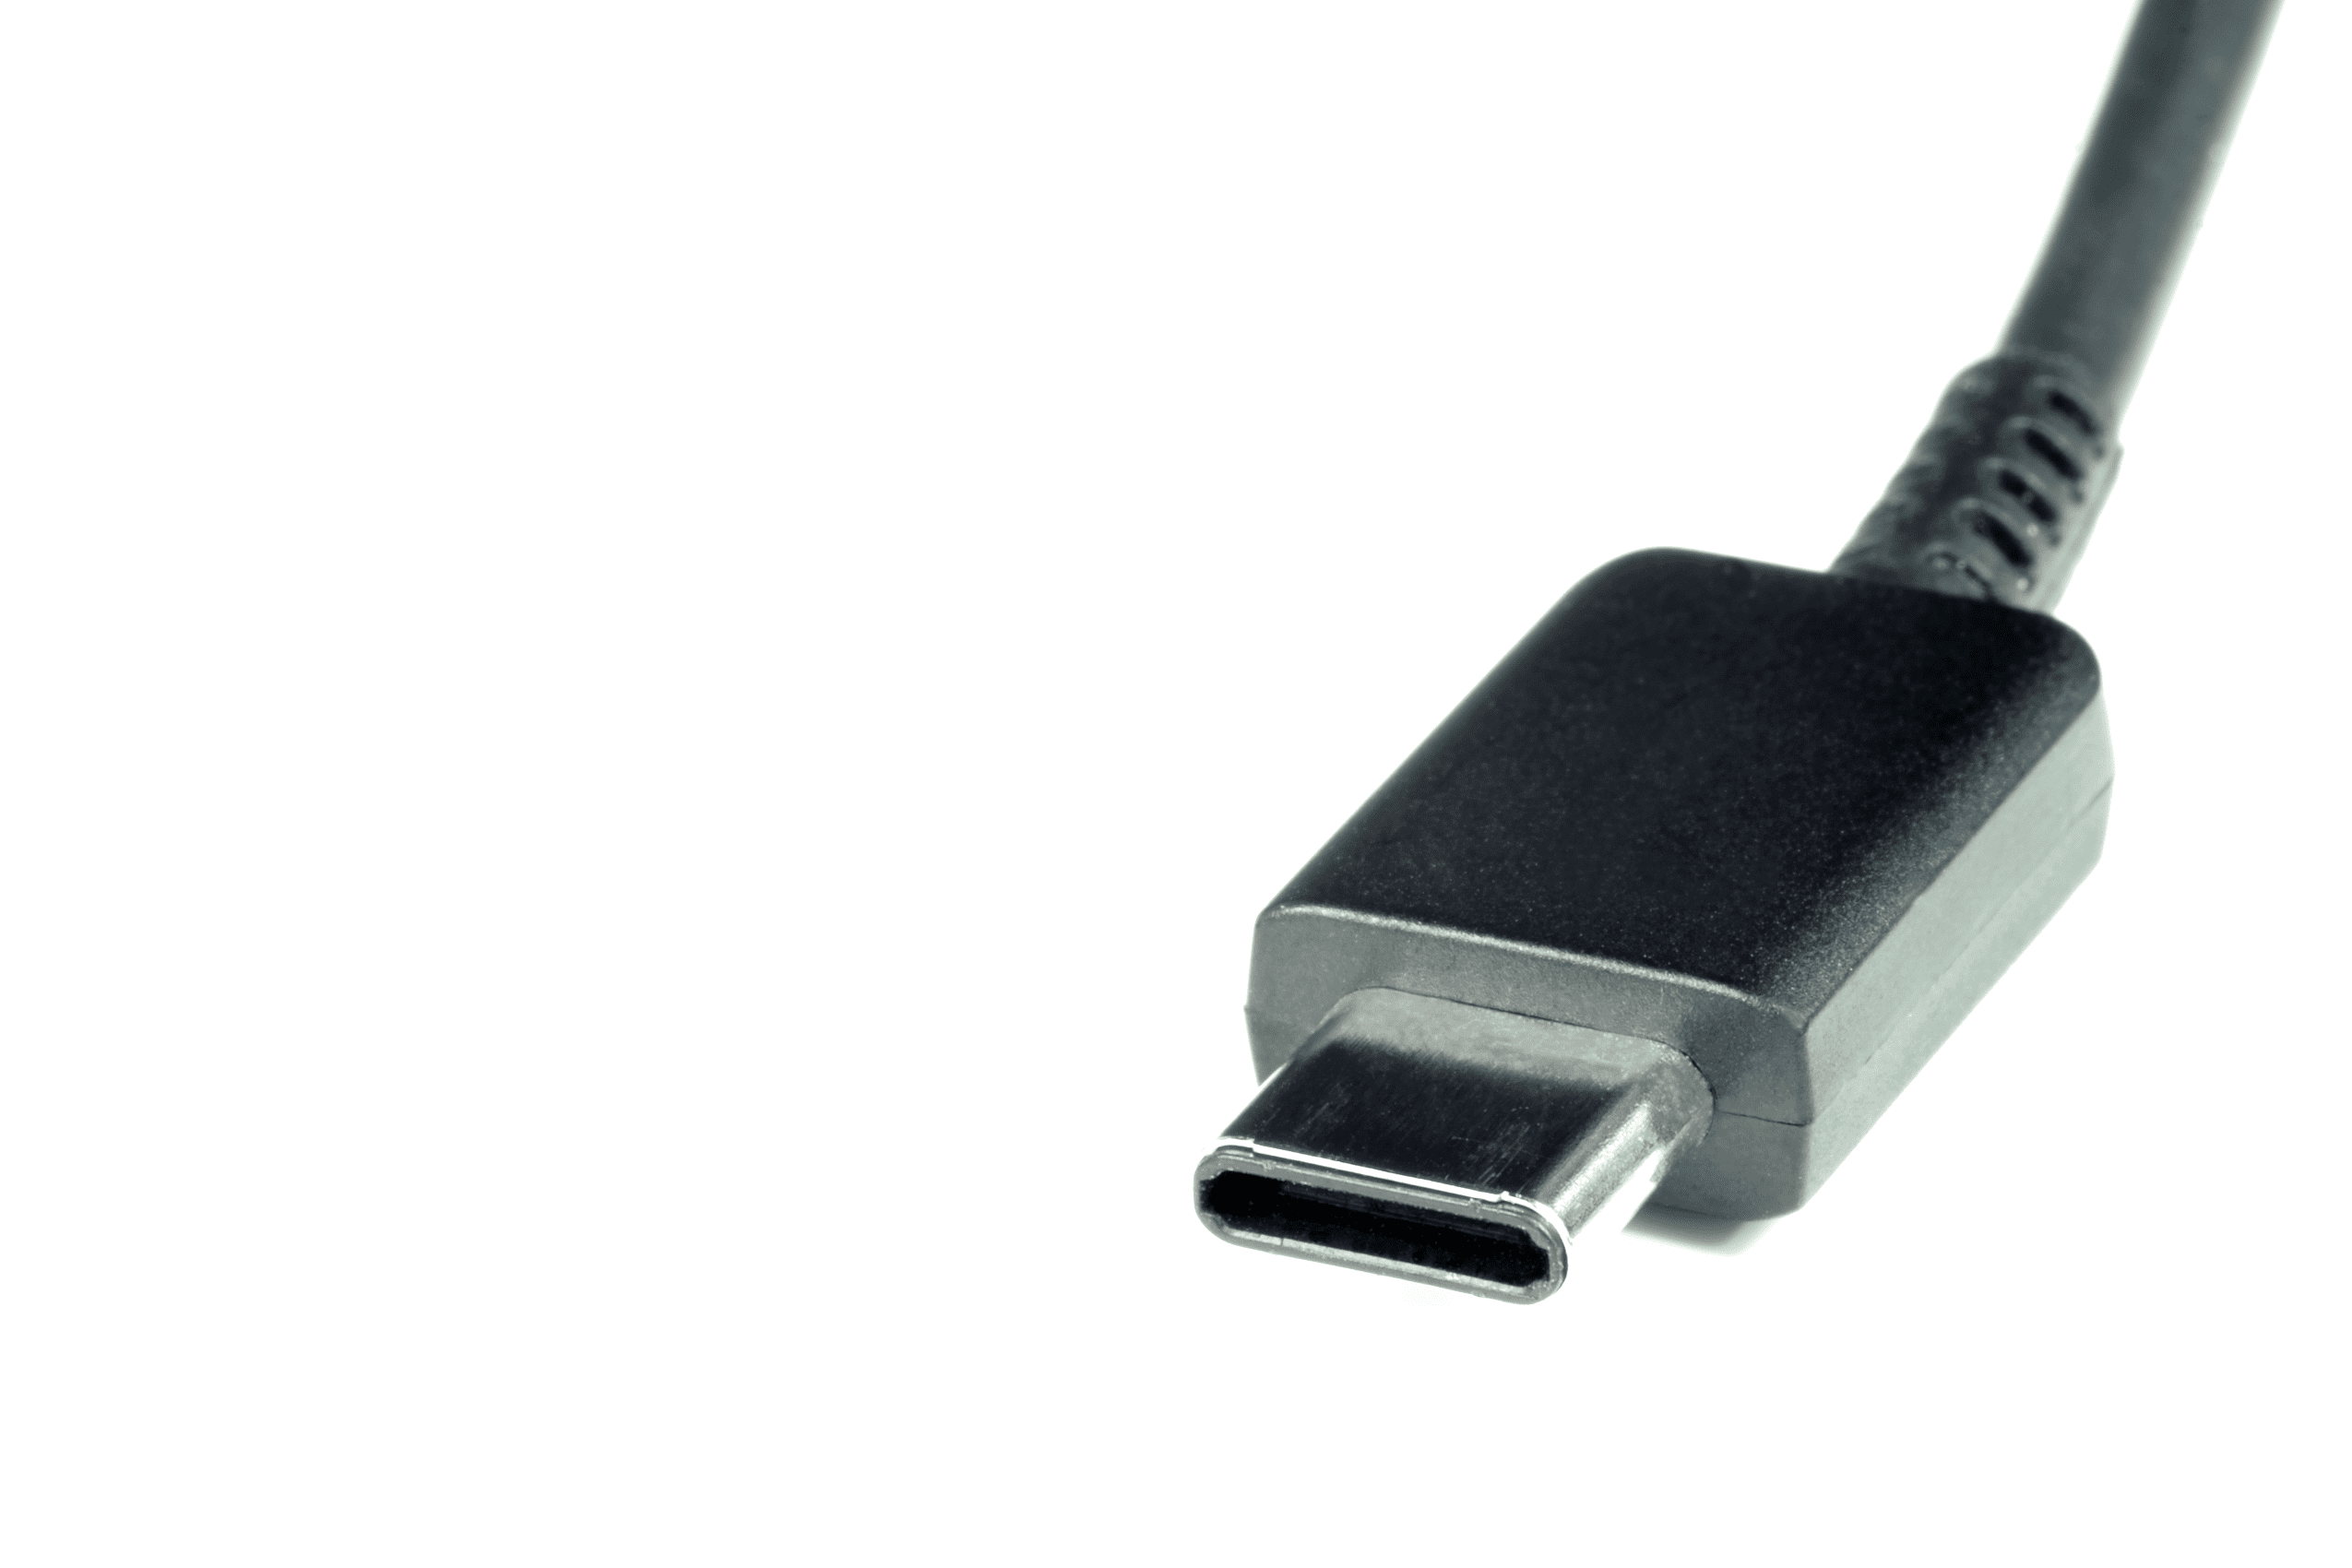 USB C Lead on a white background